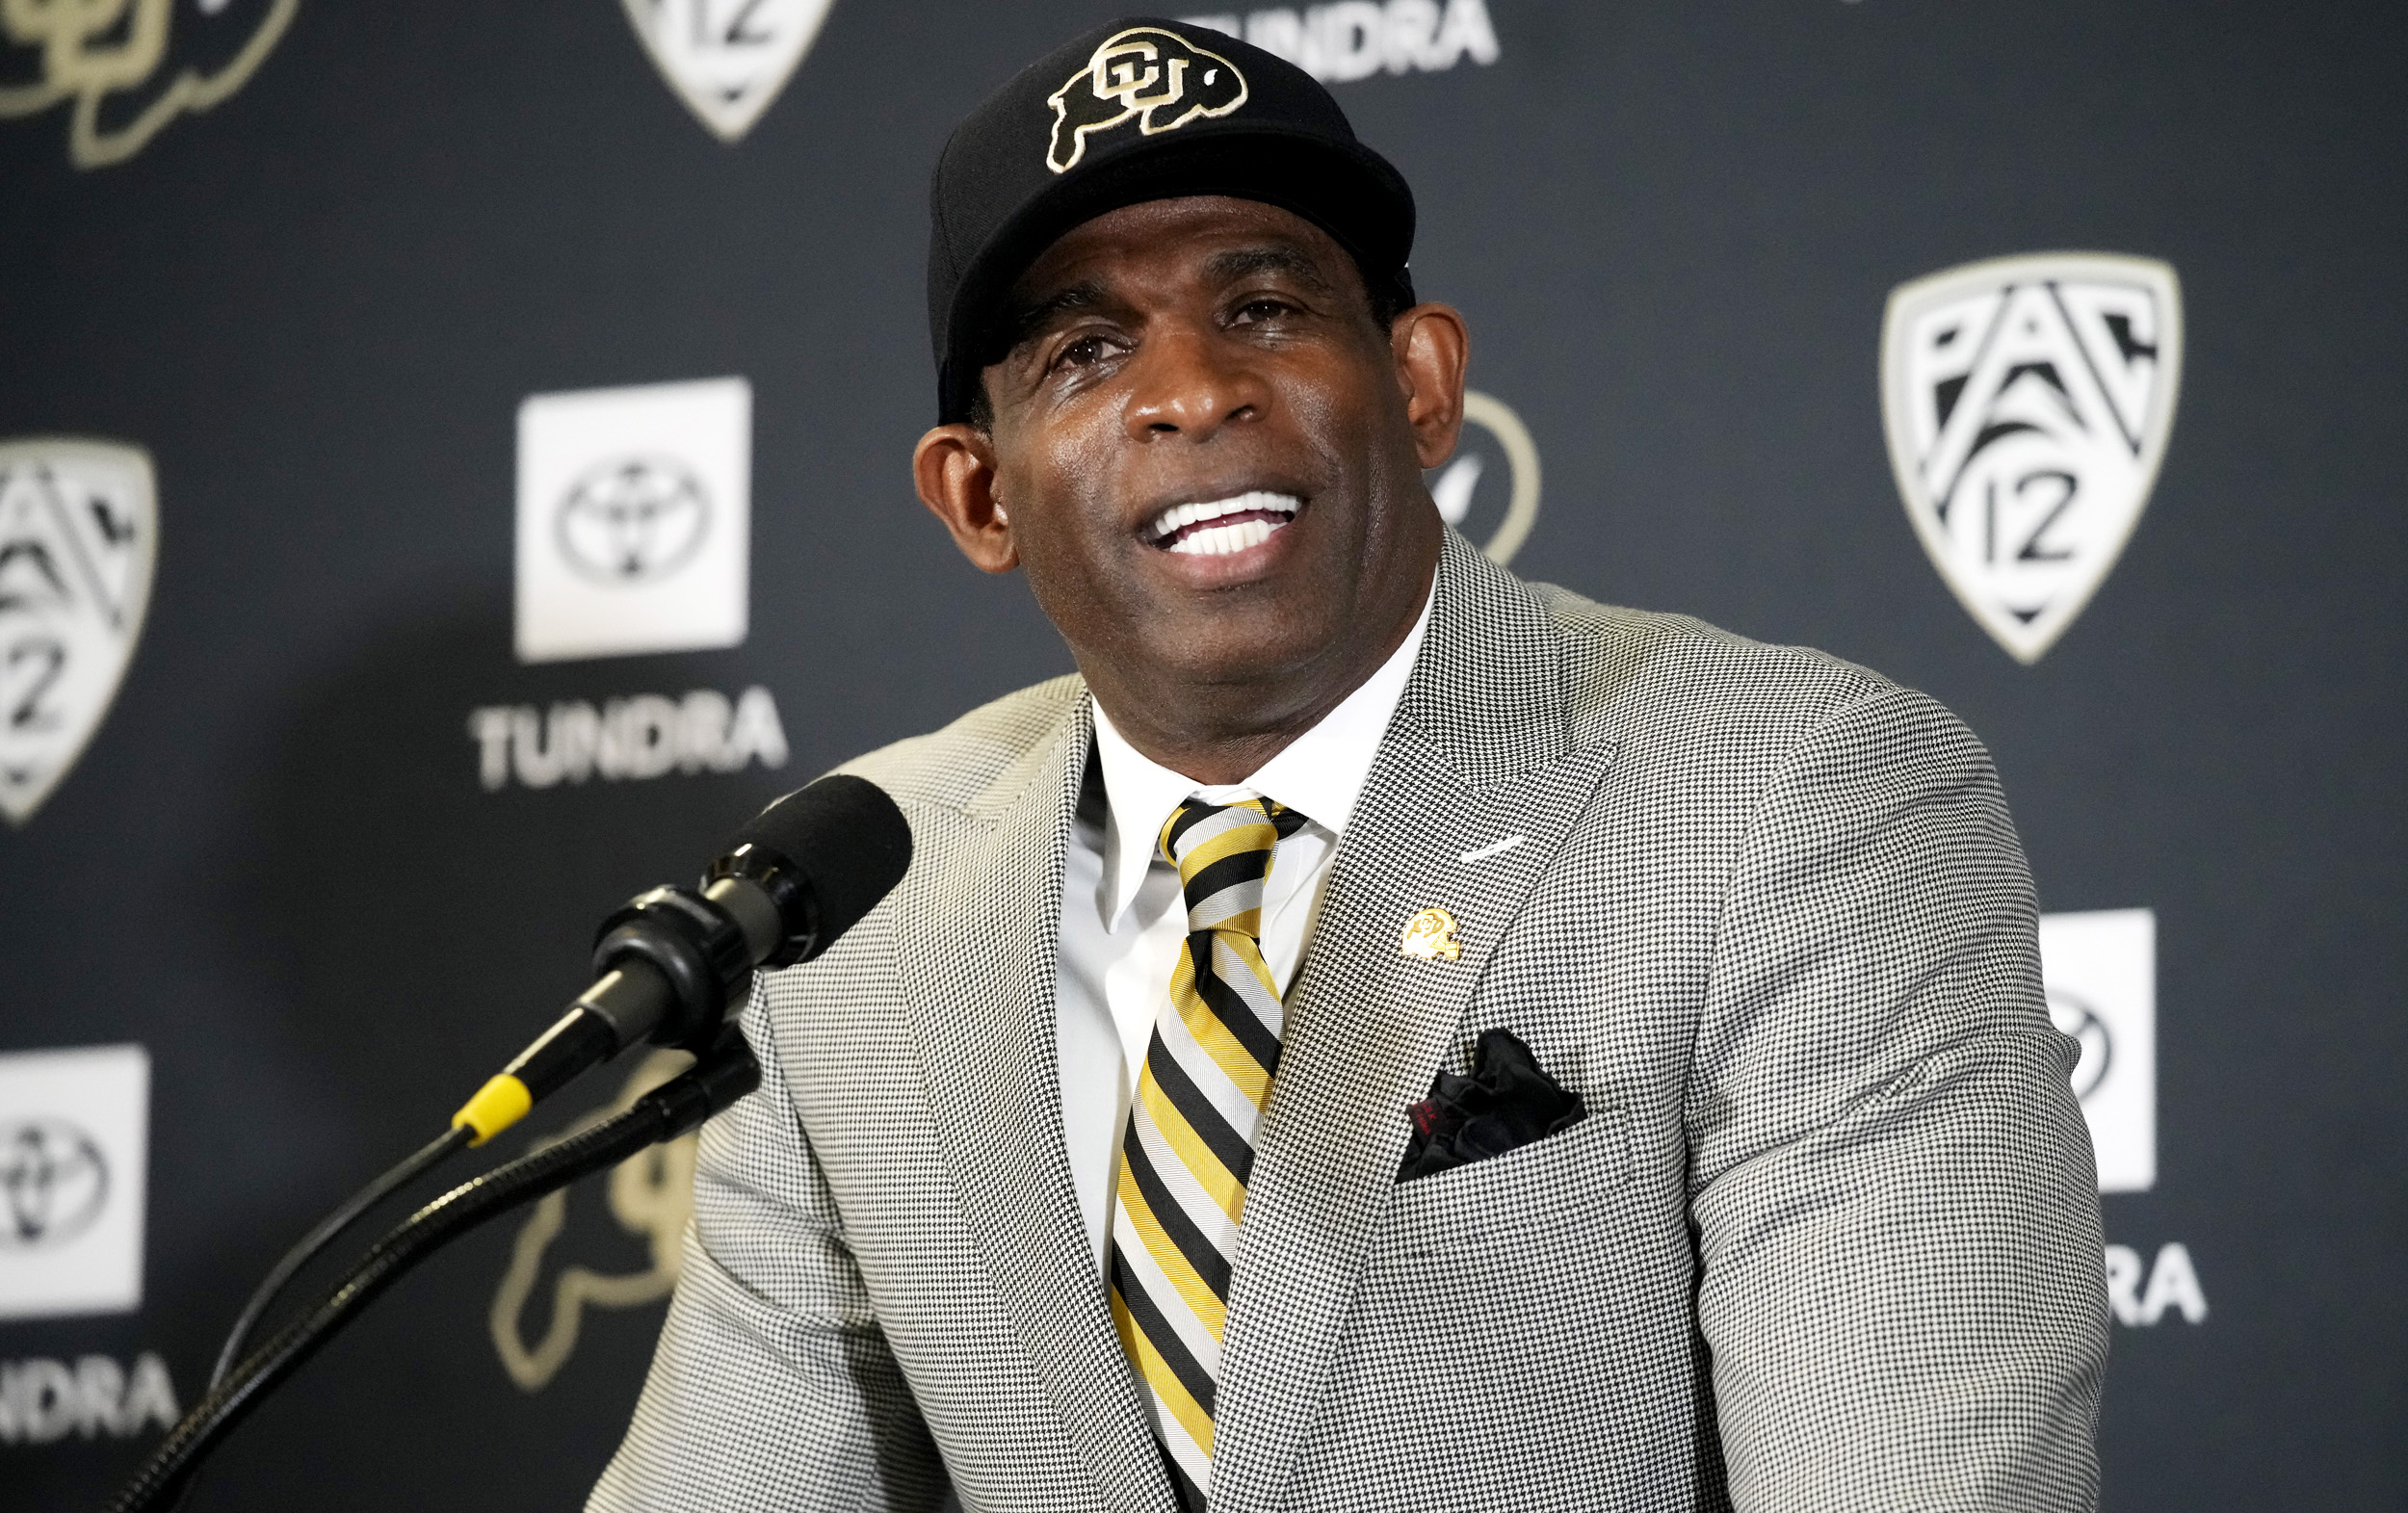 What is the net worth Deion Sanders?